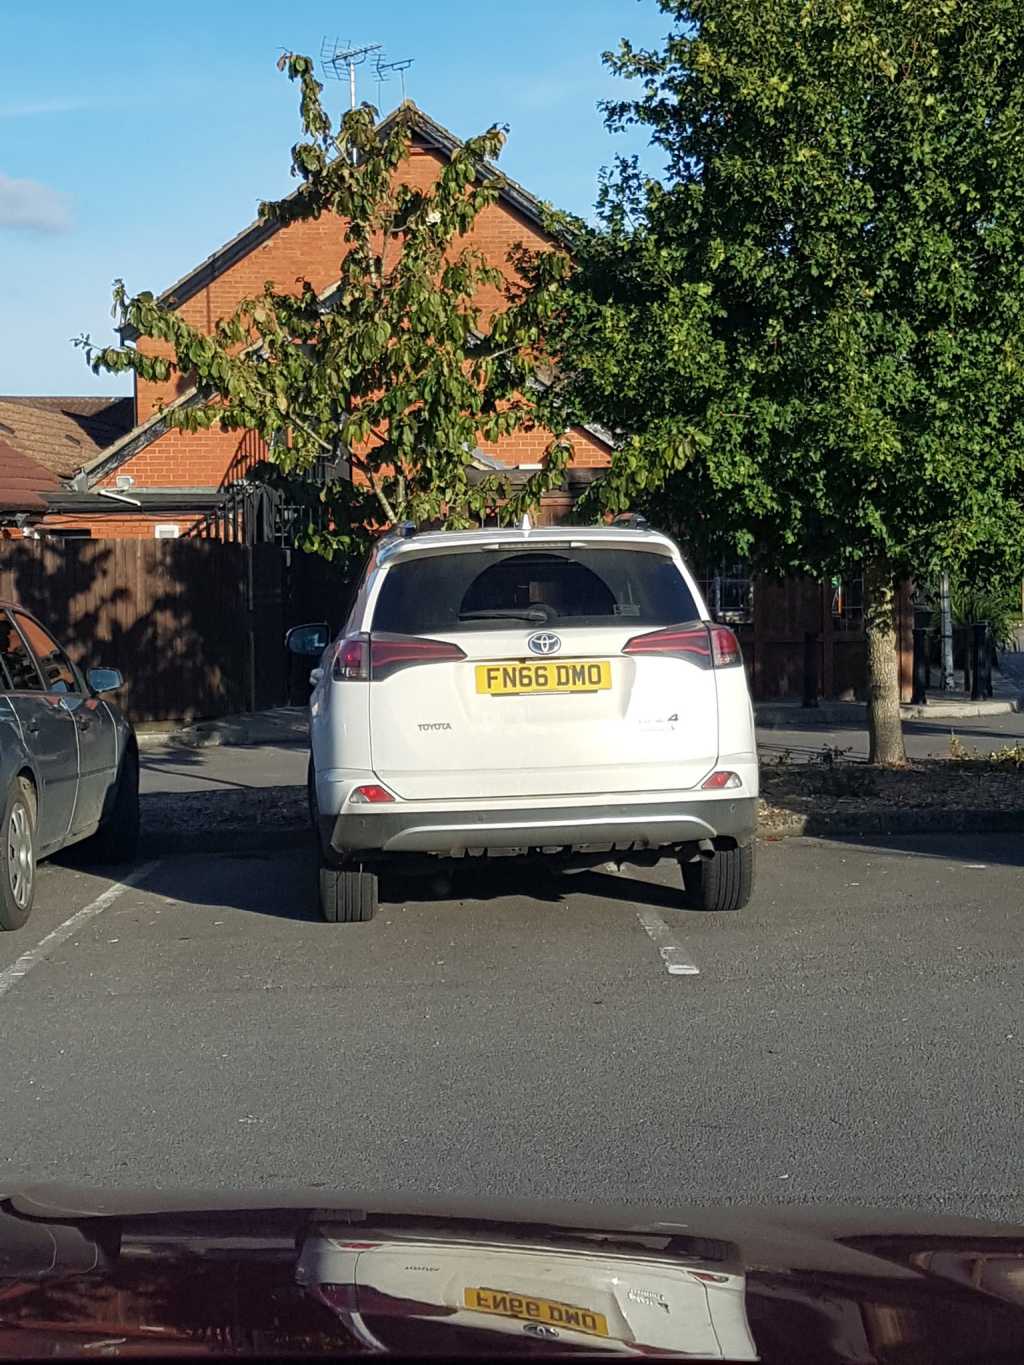 FN66 DMO is a Selfish Parker